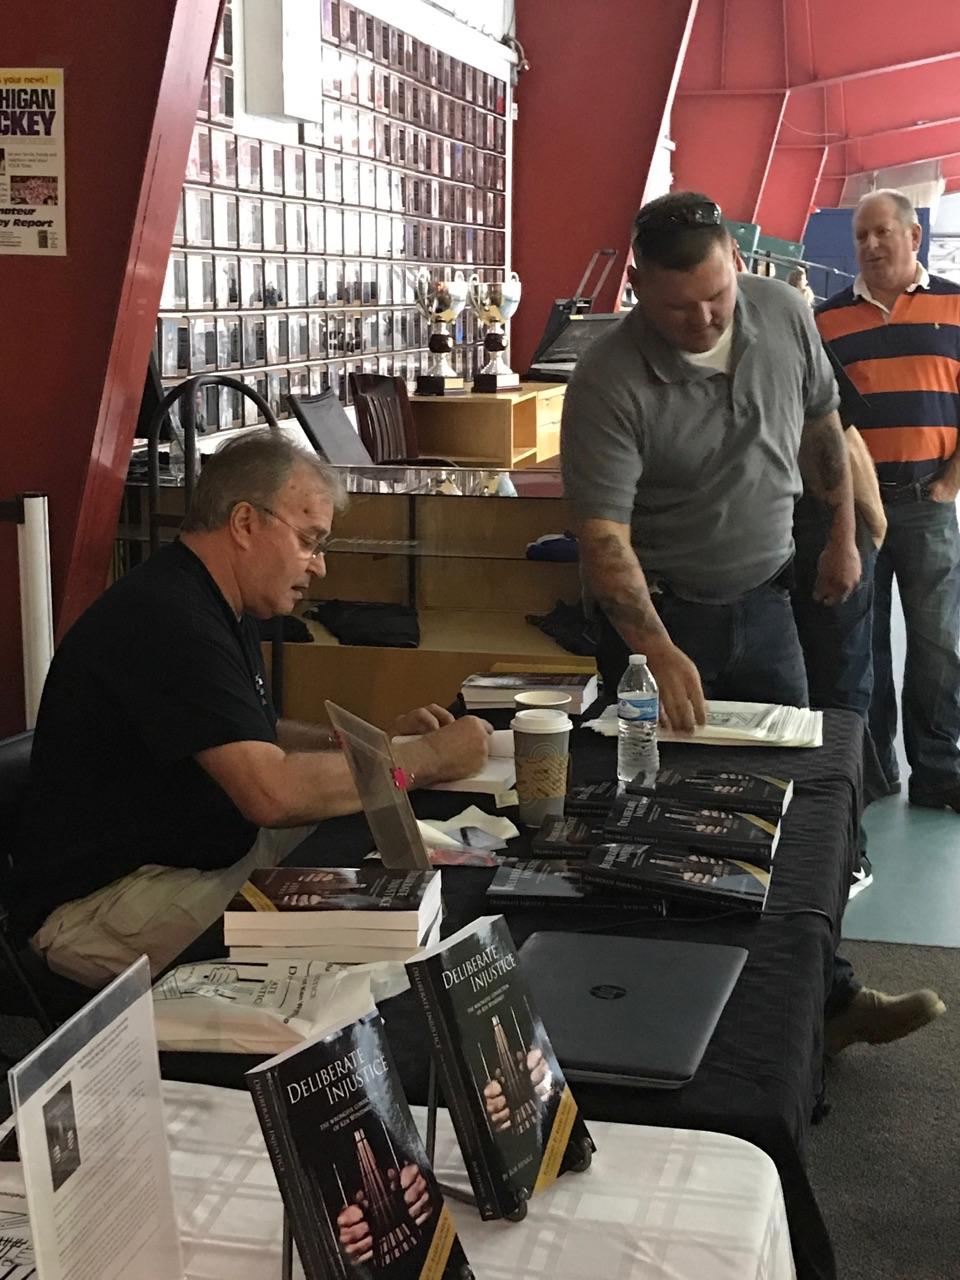 Ken at the signing table with his nephew TJ